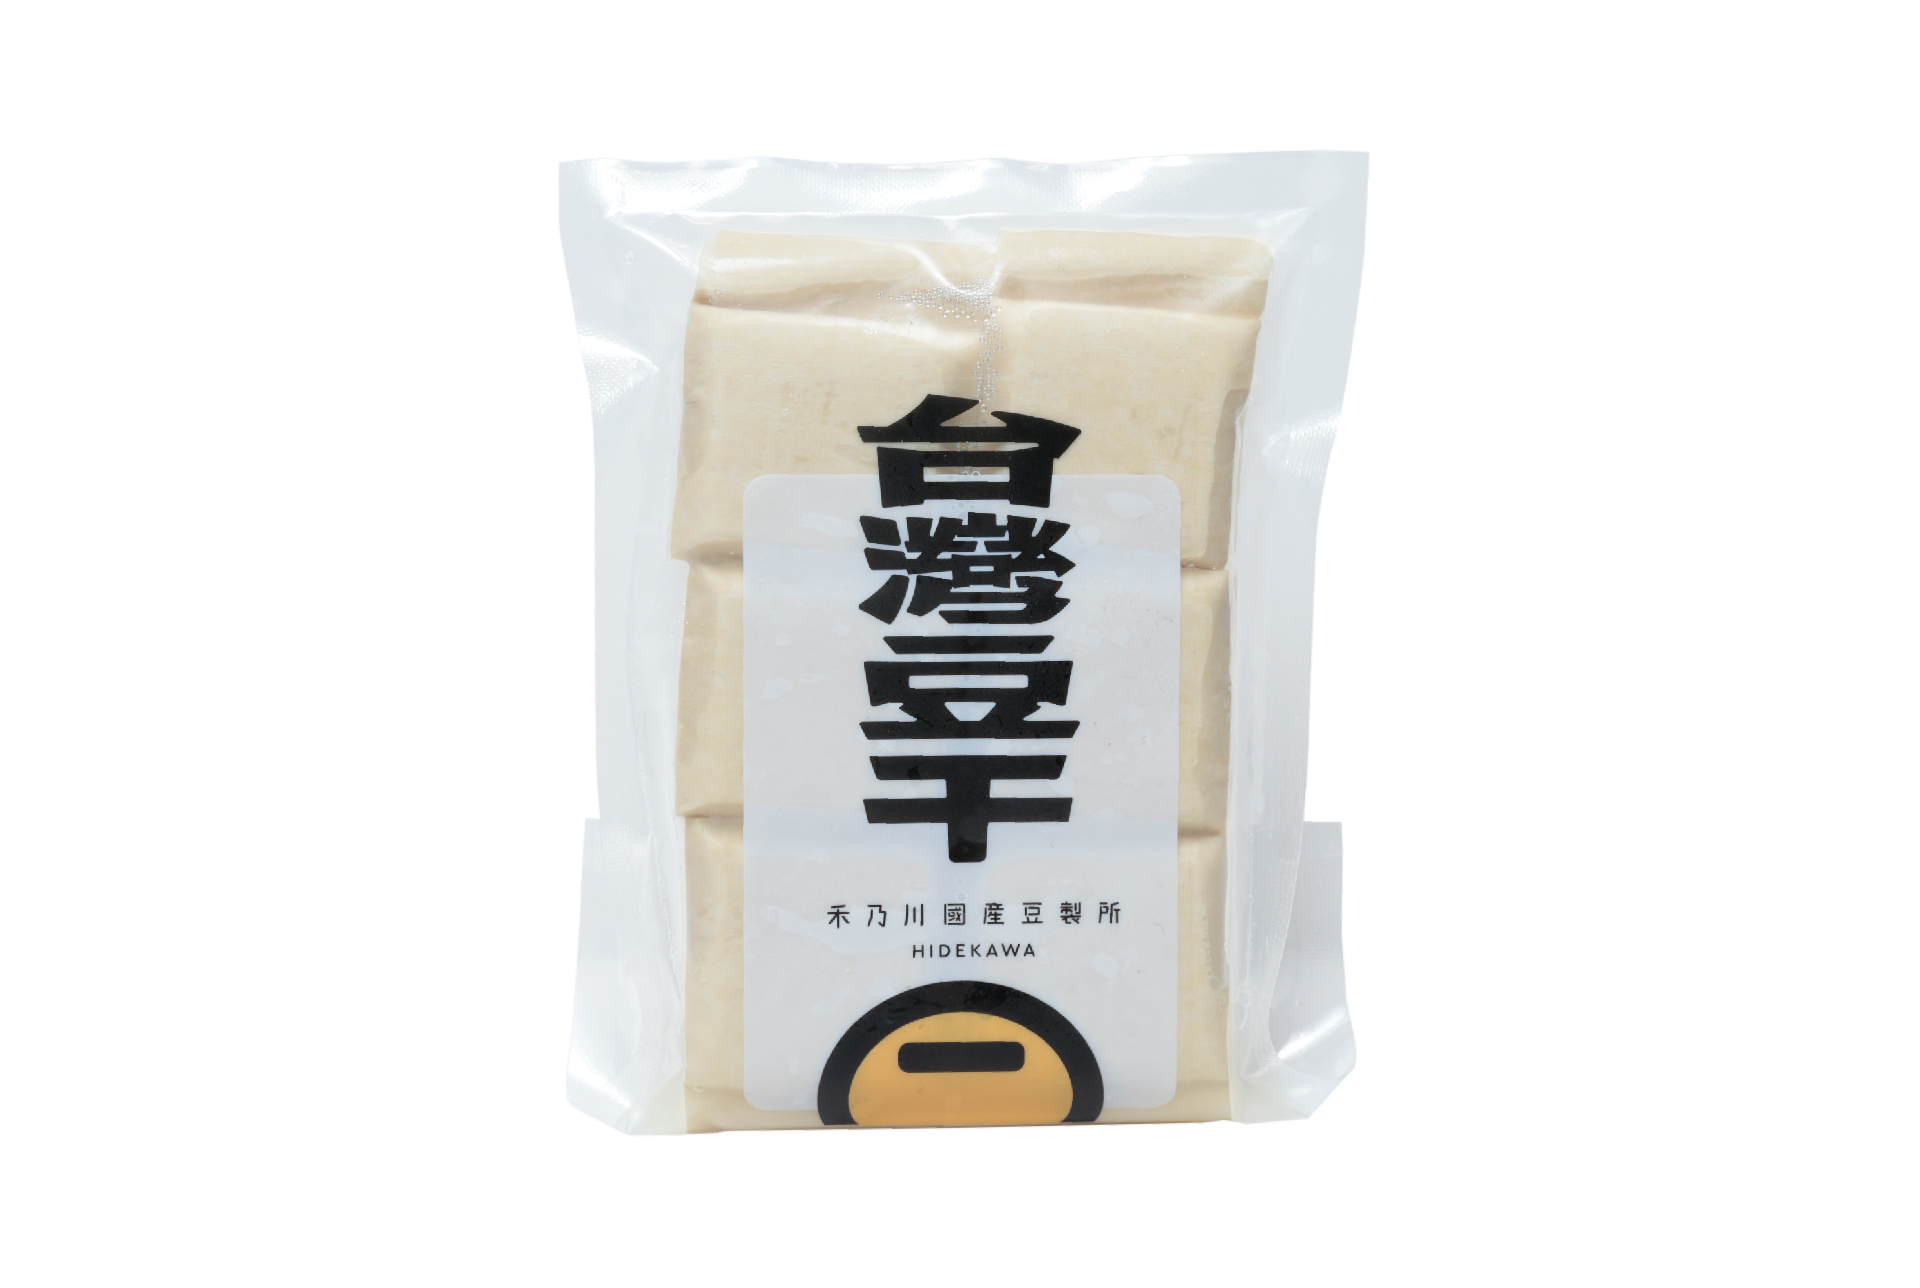 The rich fragrance of soybean, accompanied with the salty taste of the ocean | Taiwan domestic non-GMO soy milk shop | HIDEKAWA